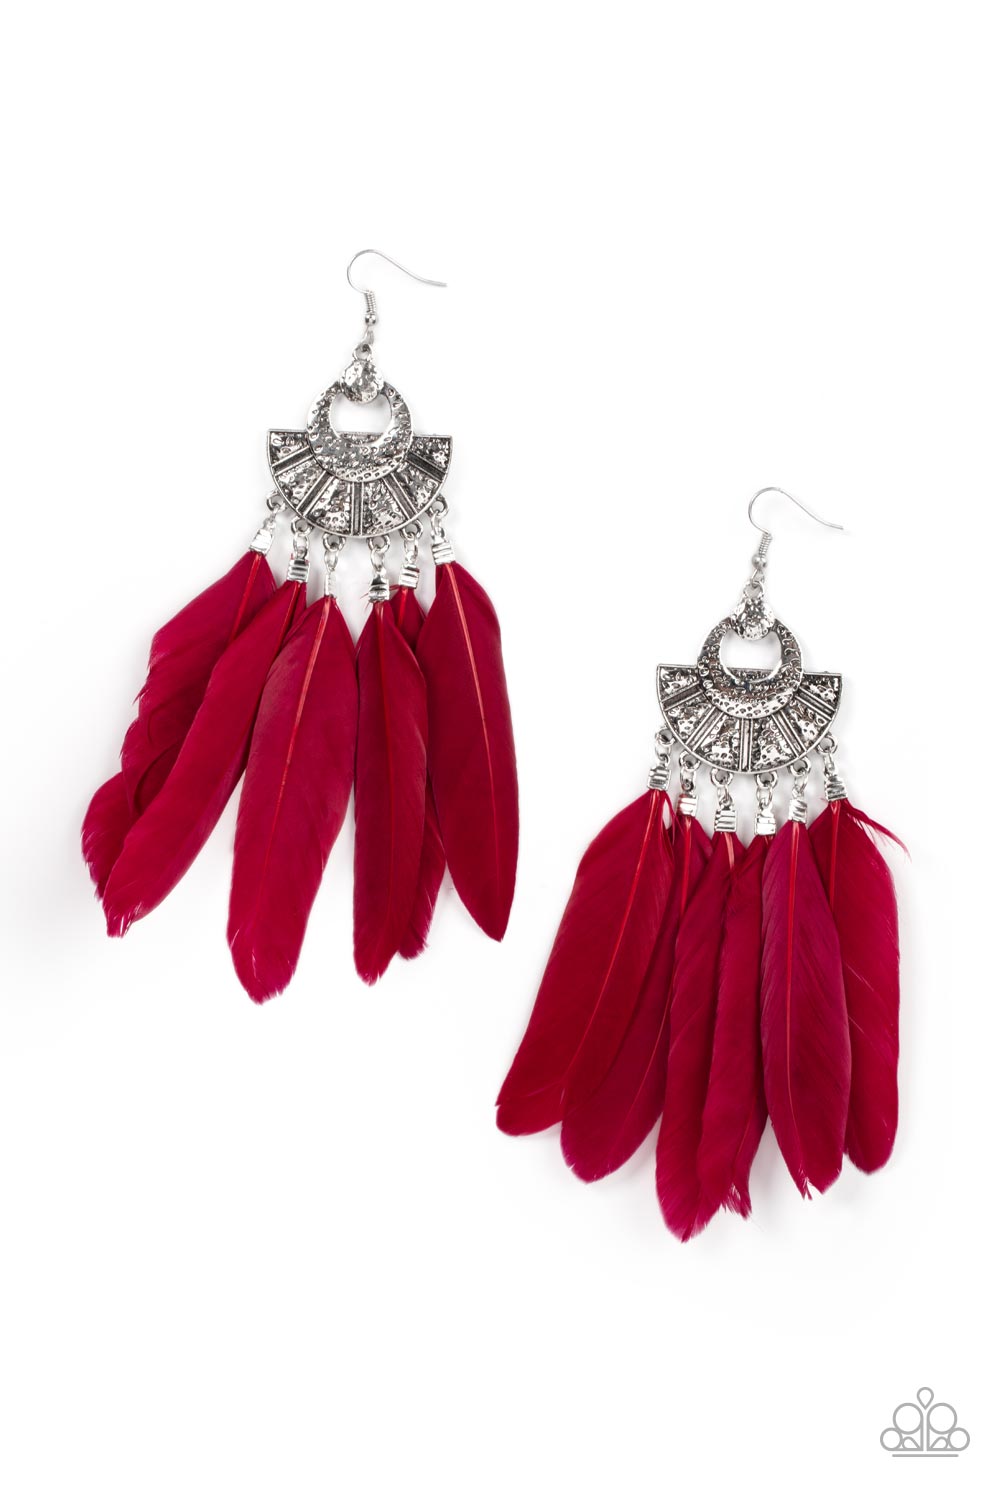 Oversized red feathers swing from the bottom of an ornately hammered and stacked silver frame, resulting in a flirtatiously colorful fringe. Earring attaches to a standard fishhook fitting.